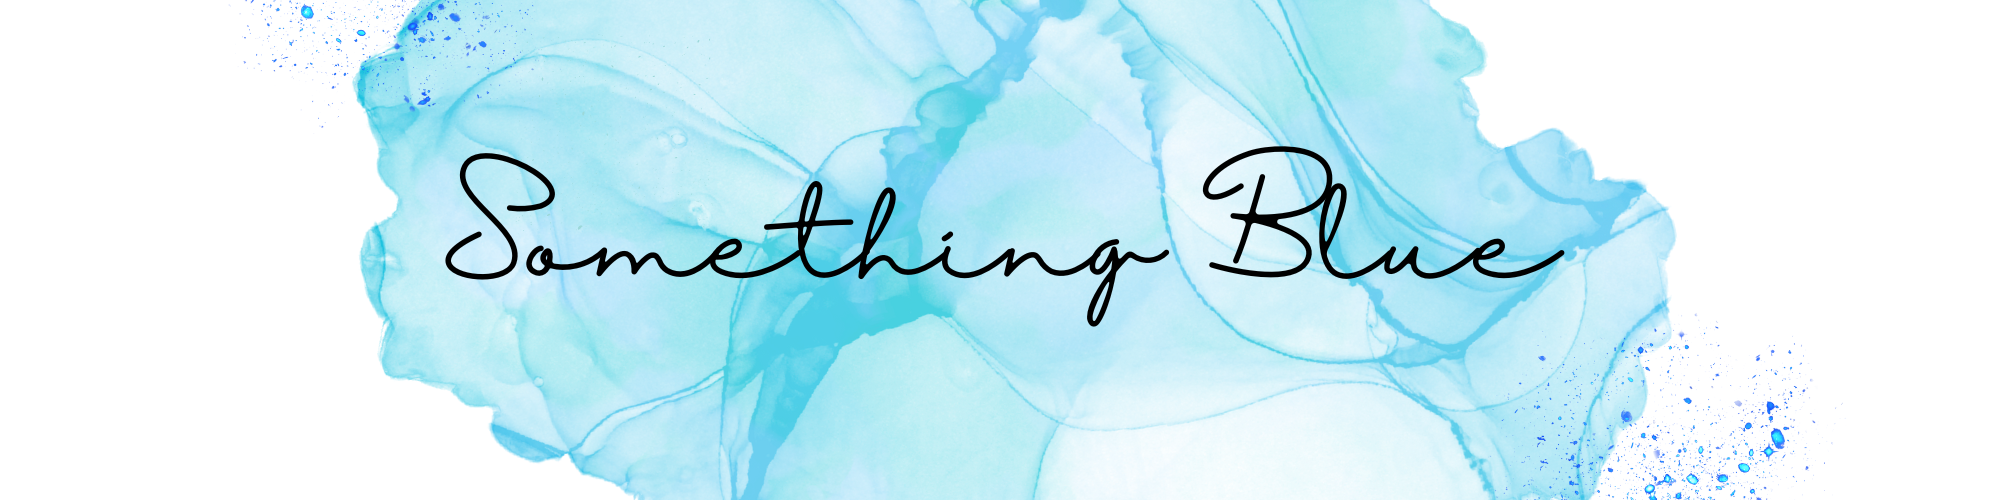 What is Something blue? | Header Image | Blue watercolor image header